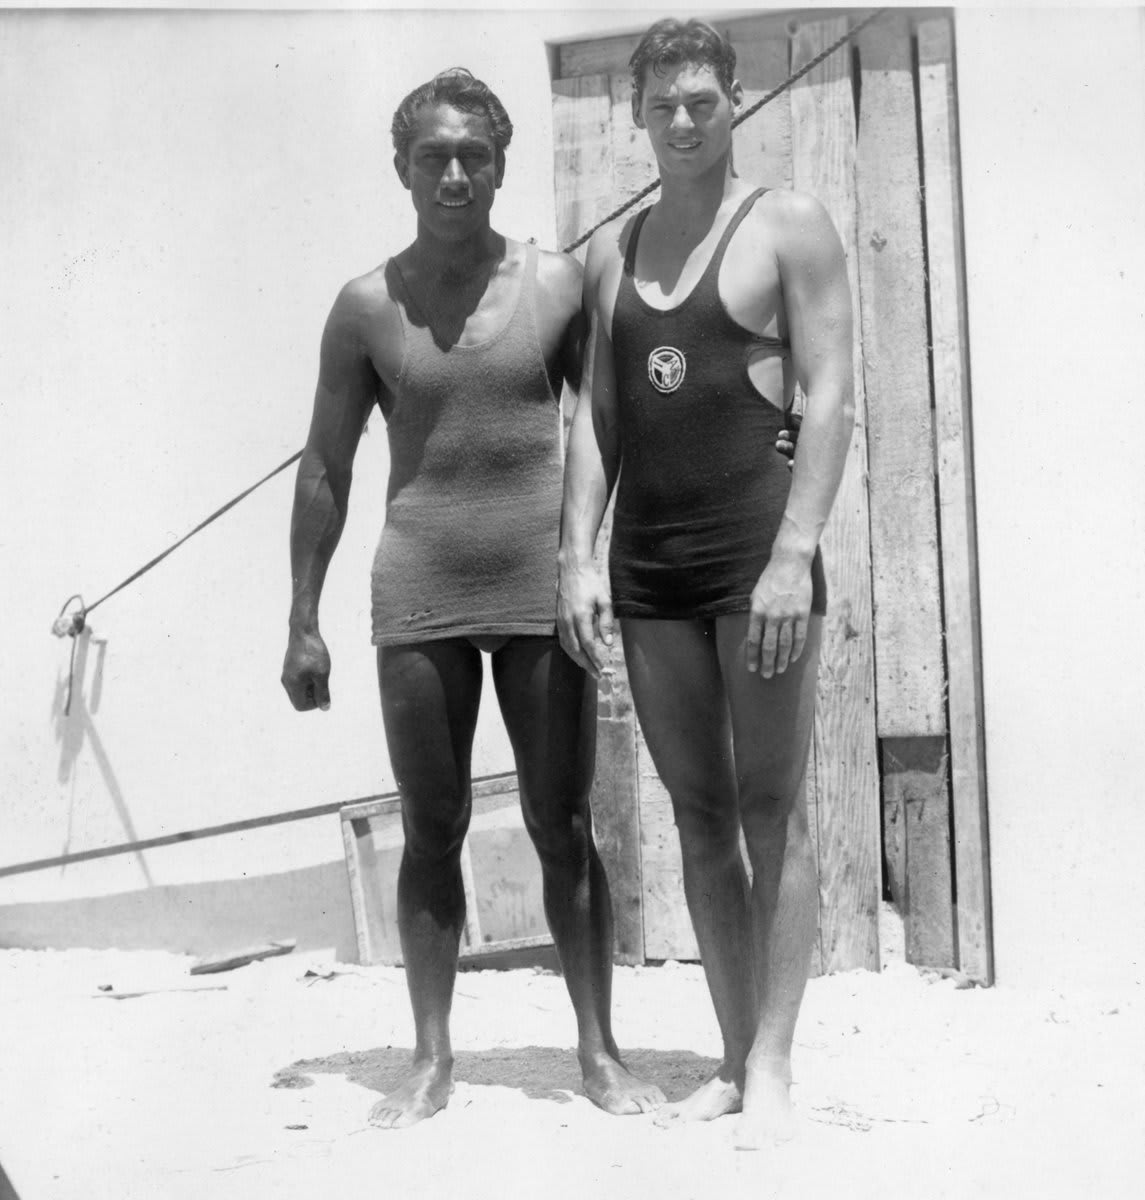 It was a whole vibe on Waikiki Beach in 1927 when water sports legends Duke Kahanamoku and Johnny Weissmuller–also known as the Big Kahuna and Tarzan–posed together.